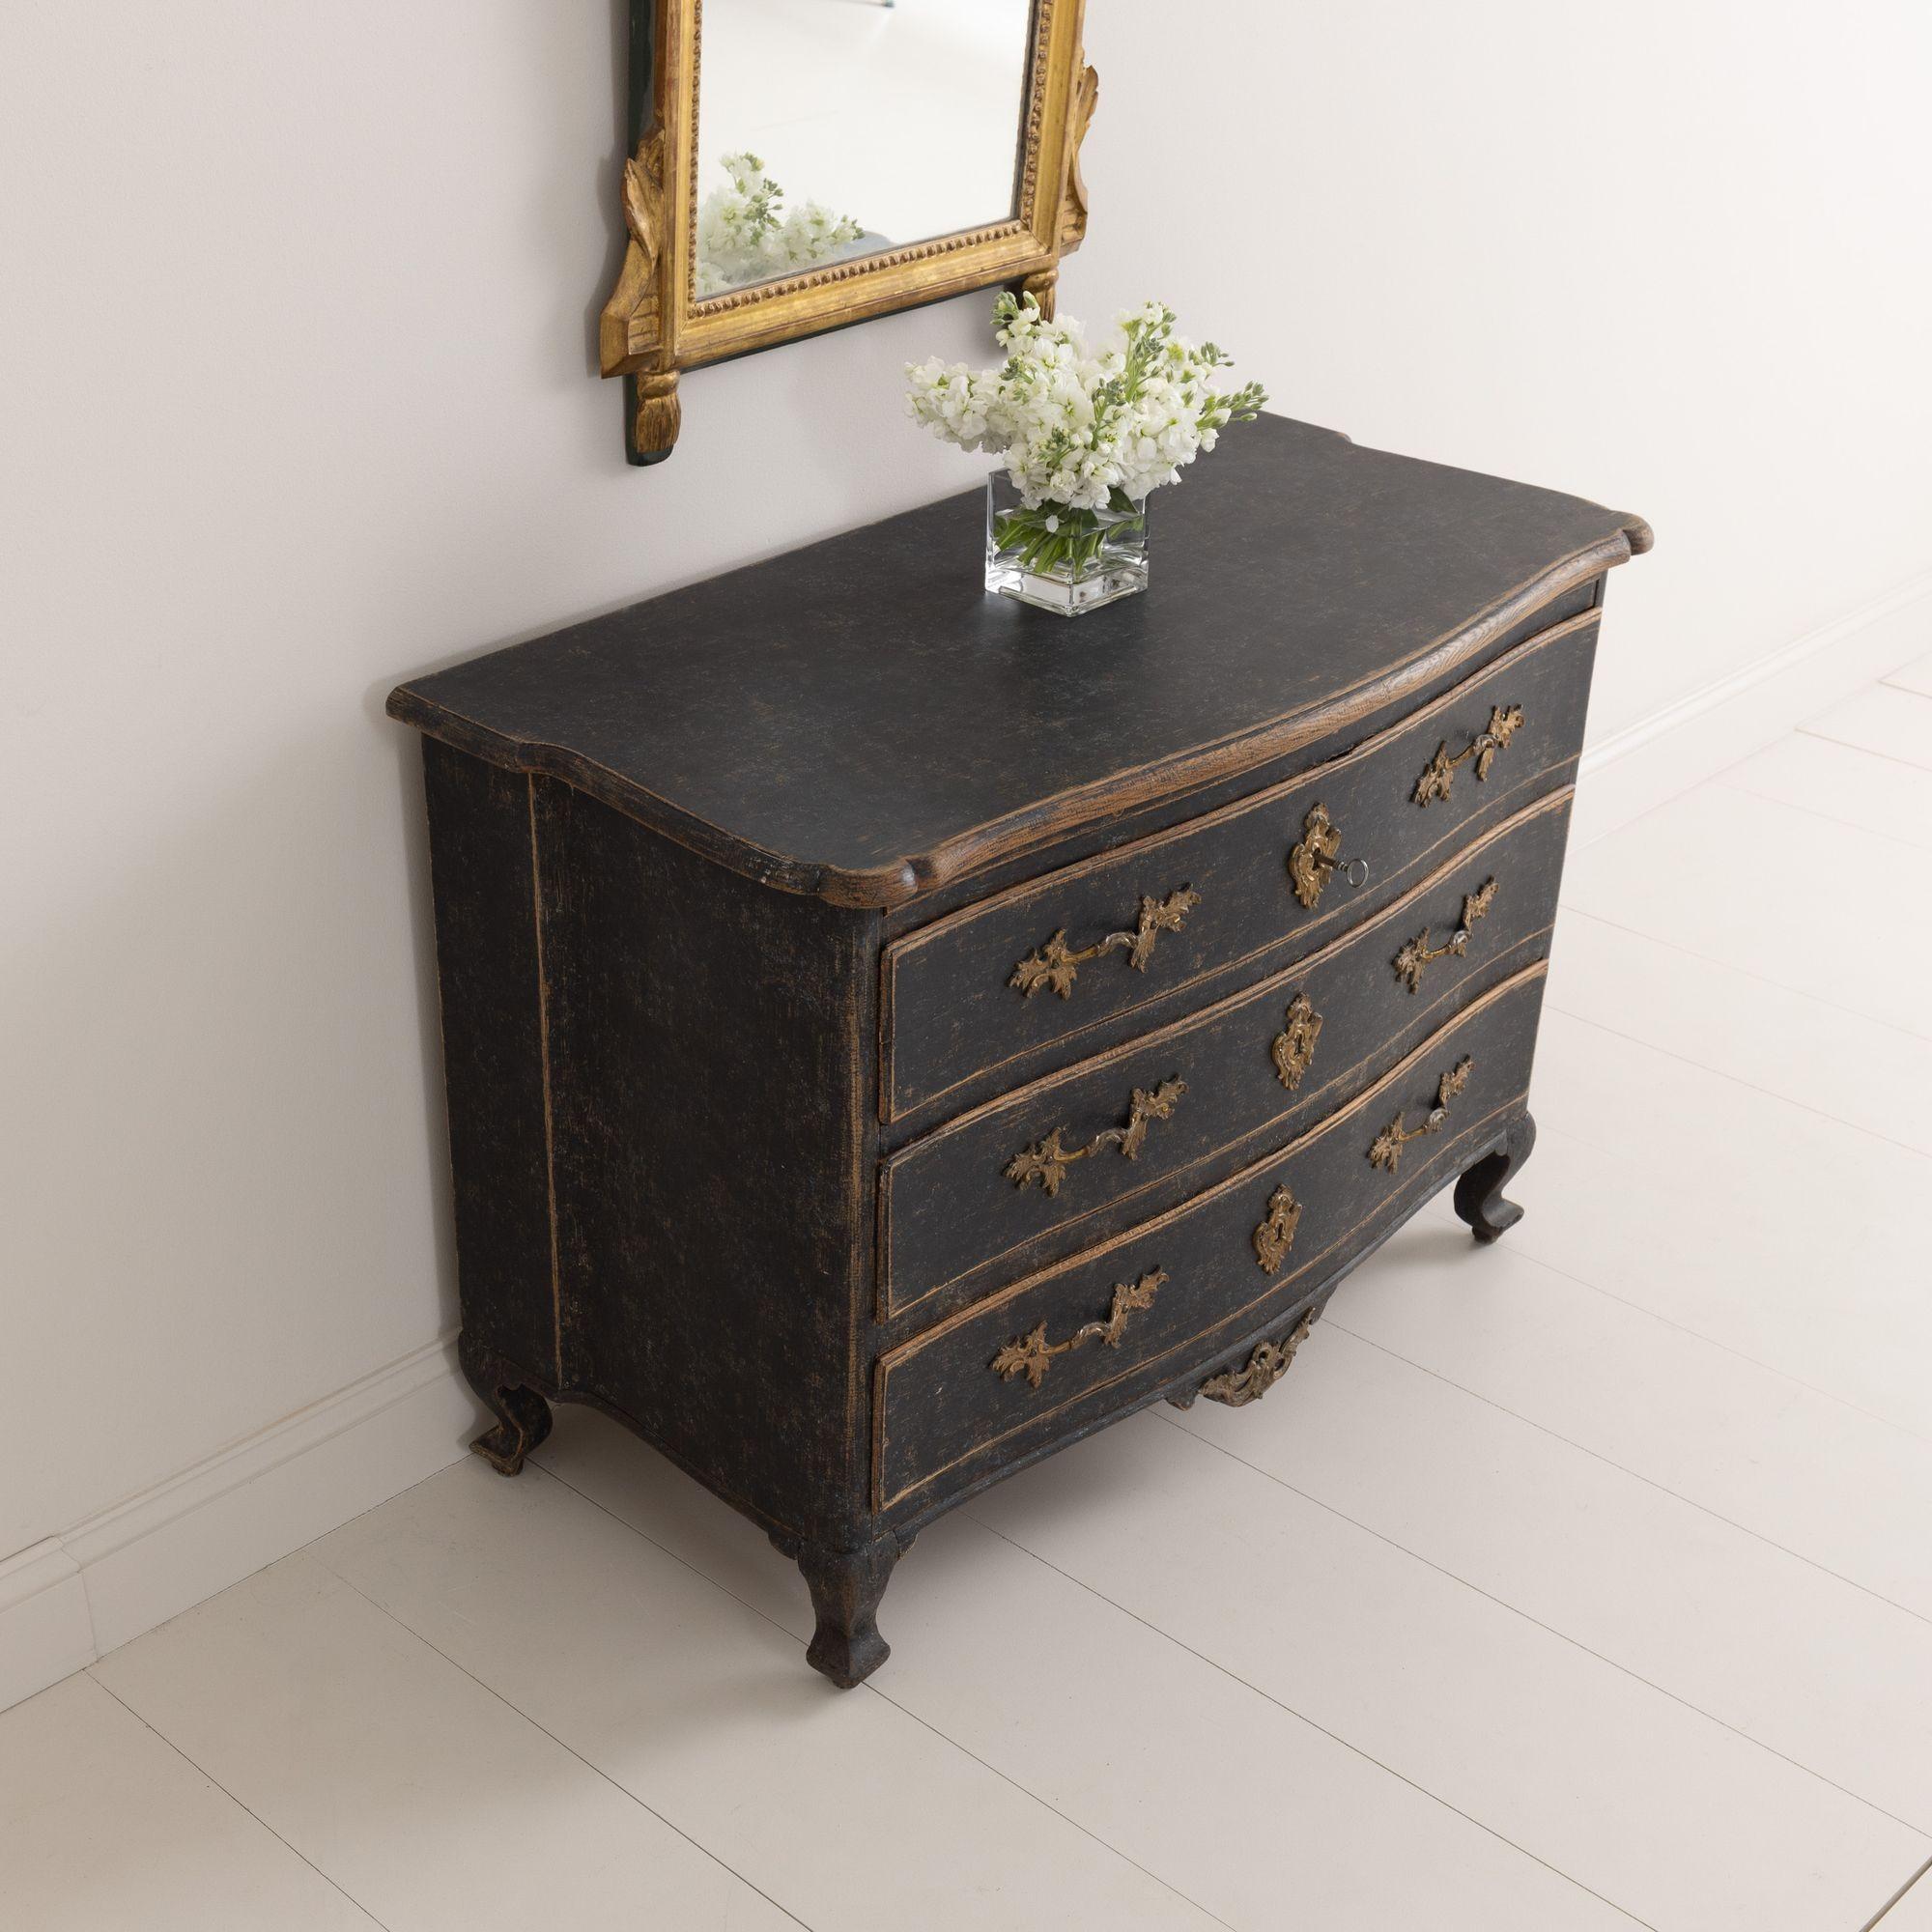 18th C. Swedish Rococo Period Black Painted Commode with Original Brass Hardware For Sale 8